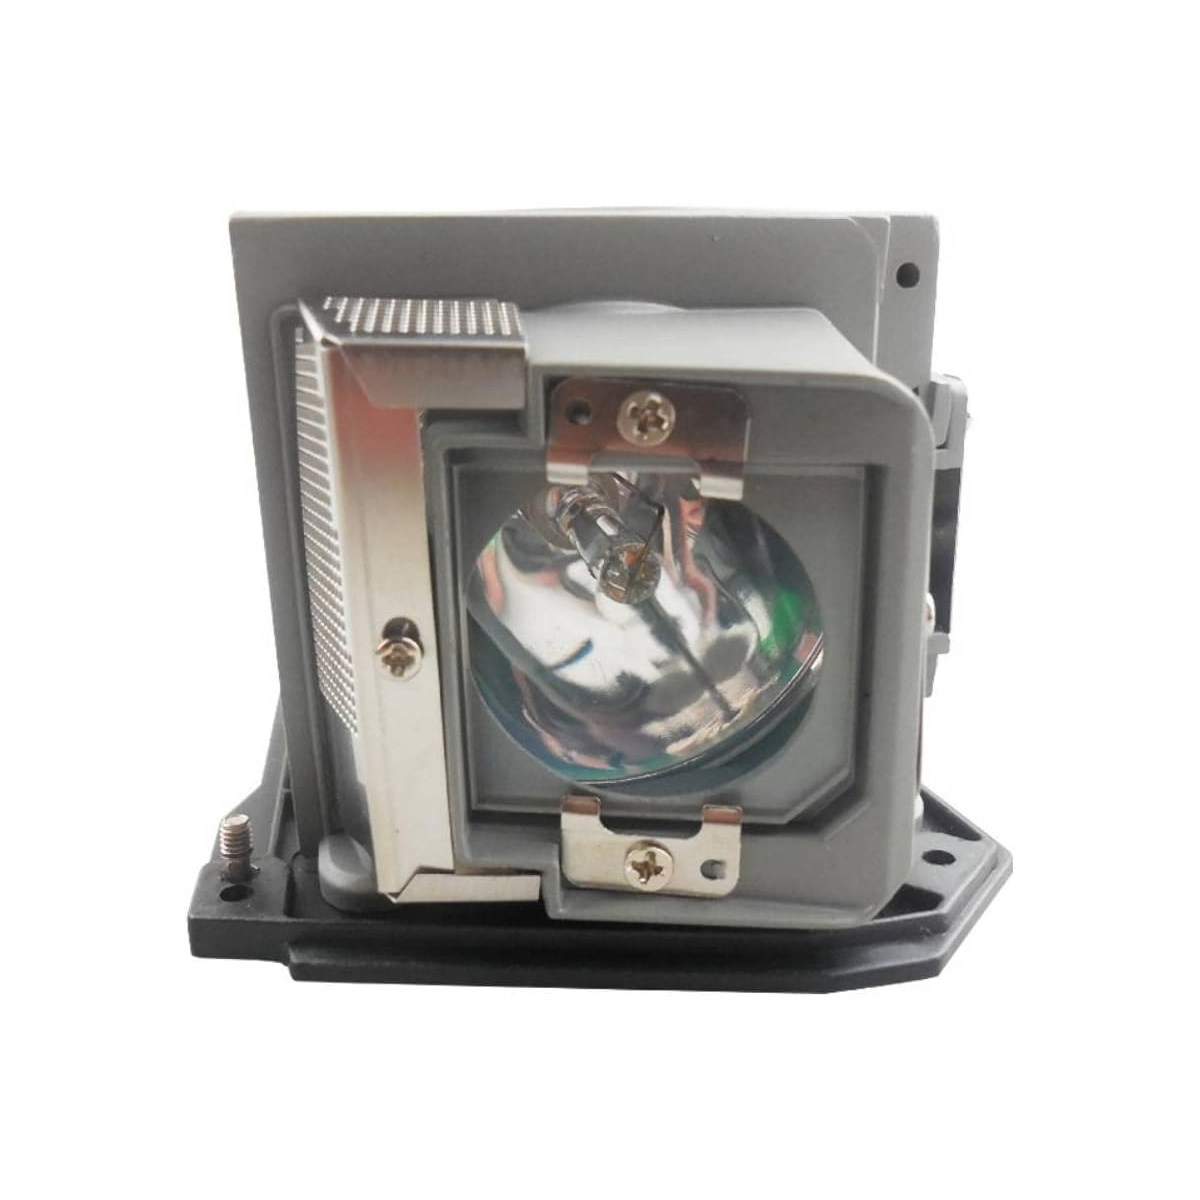 Replacement Projector lamp BL-FP280H For OPTOMA EX763 W401 X401